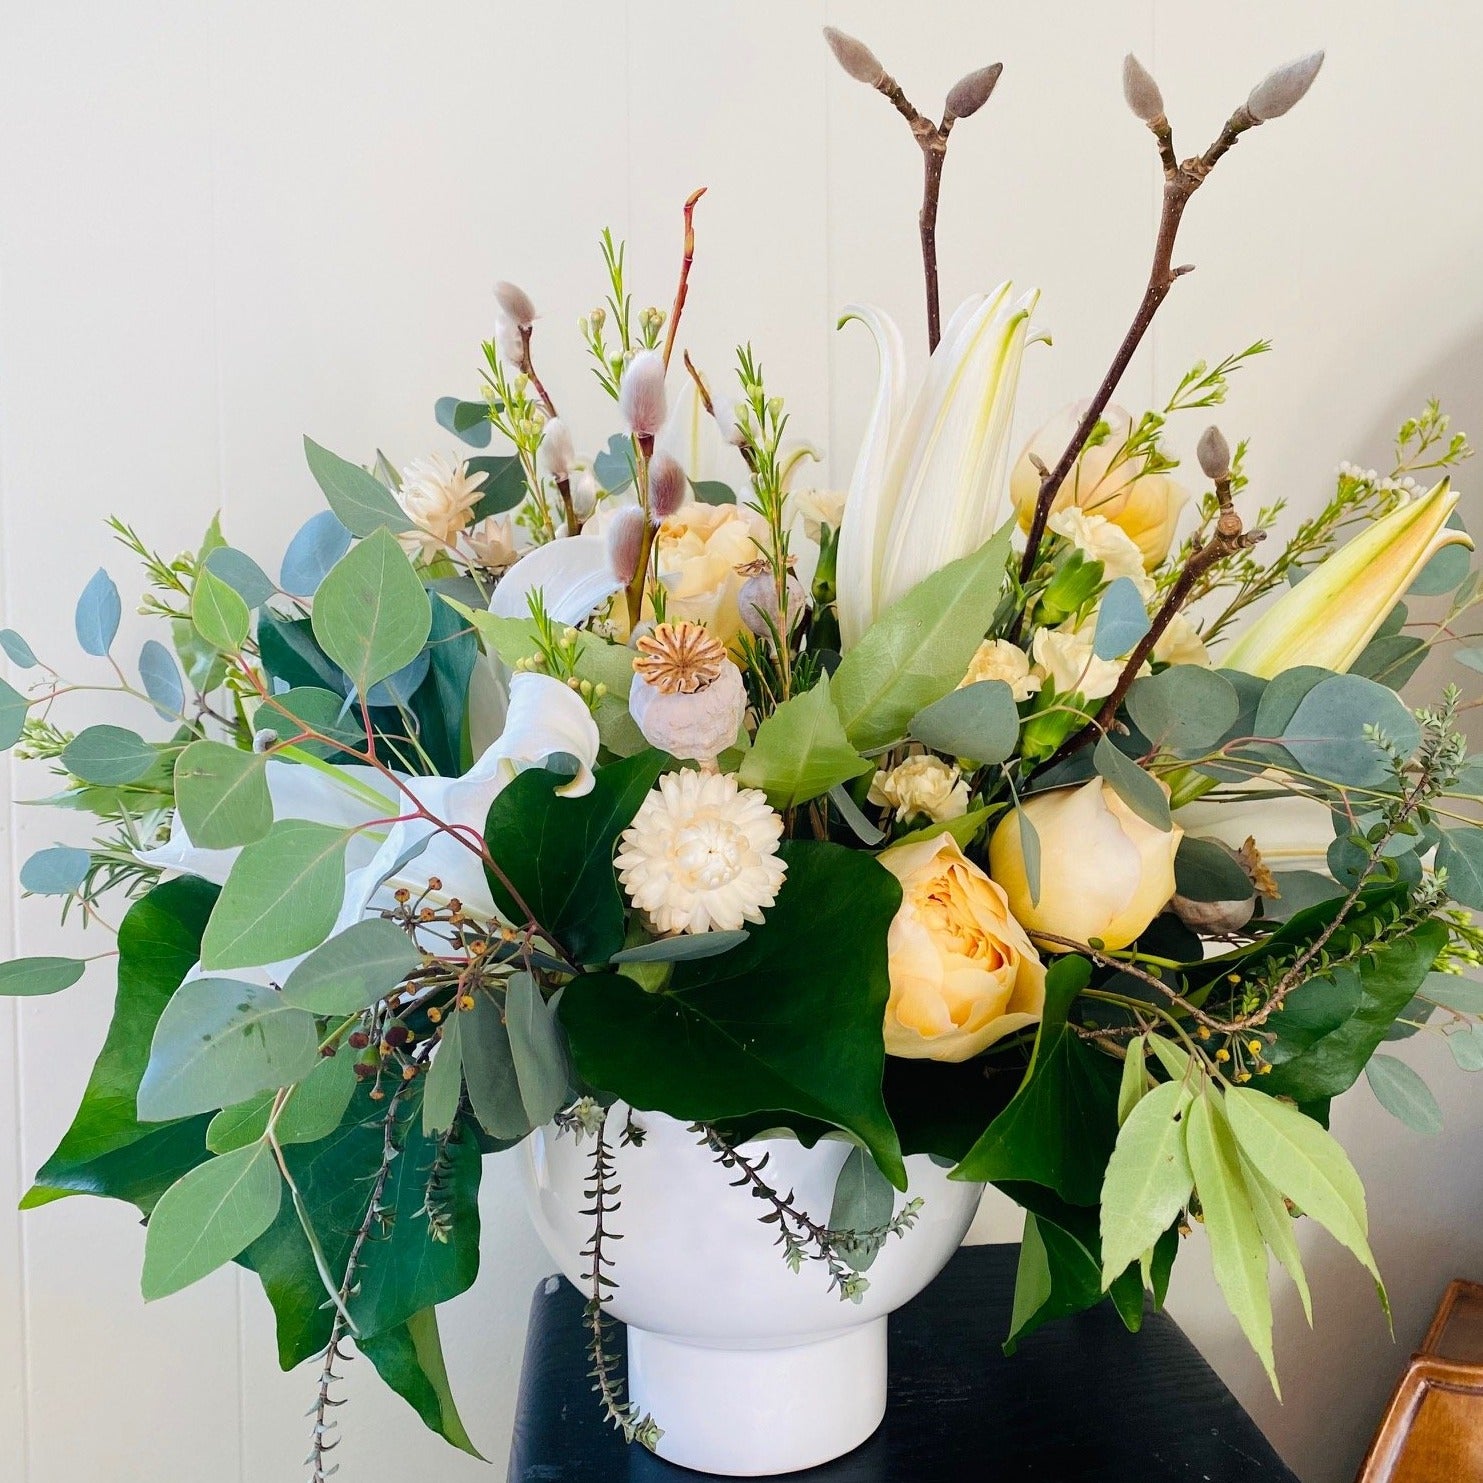 soft yellows and white flowers with mixed seasonal greenery in white ceramic vase